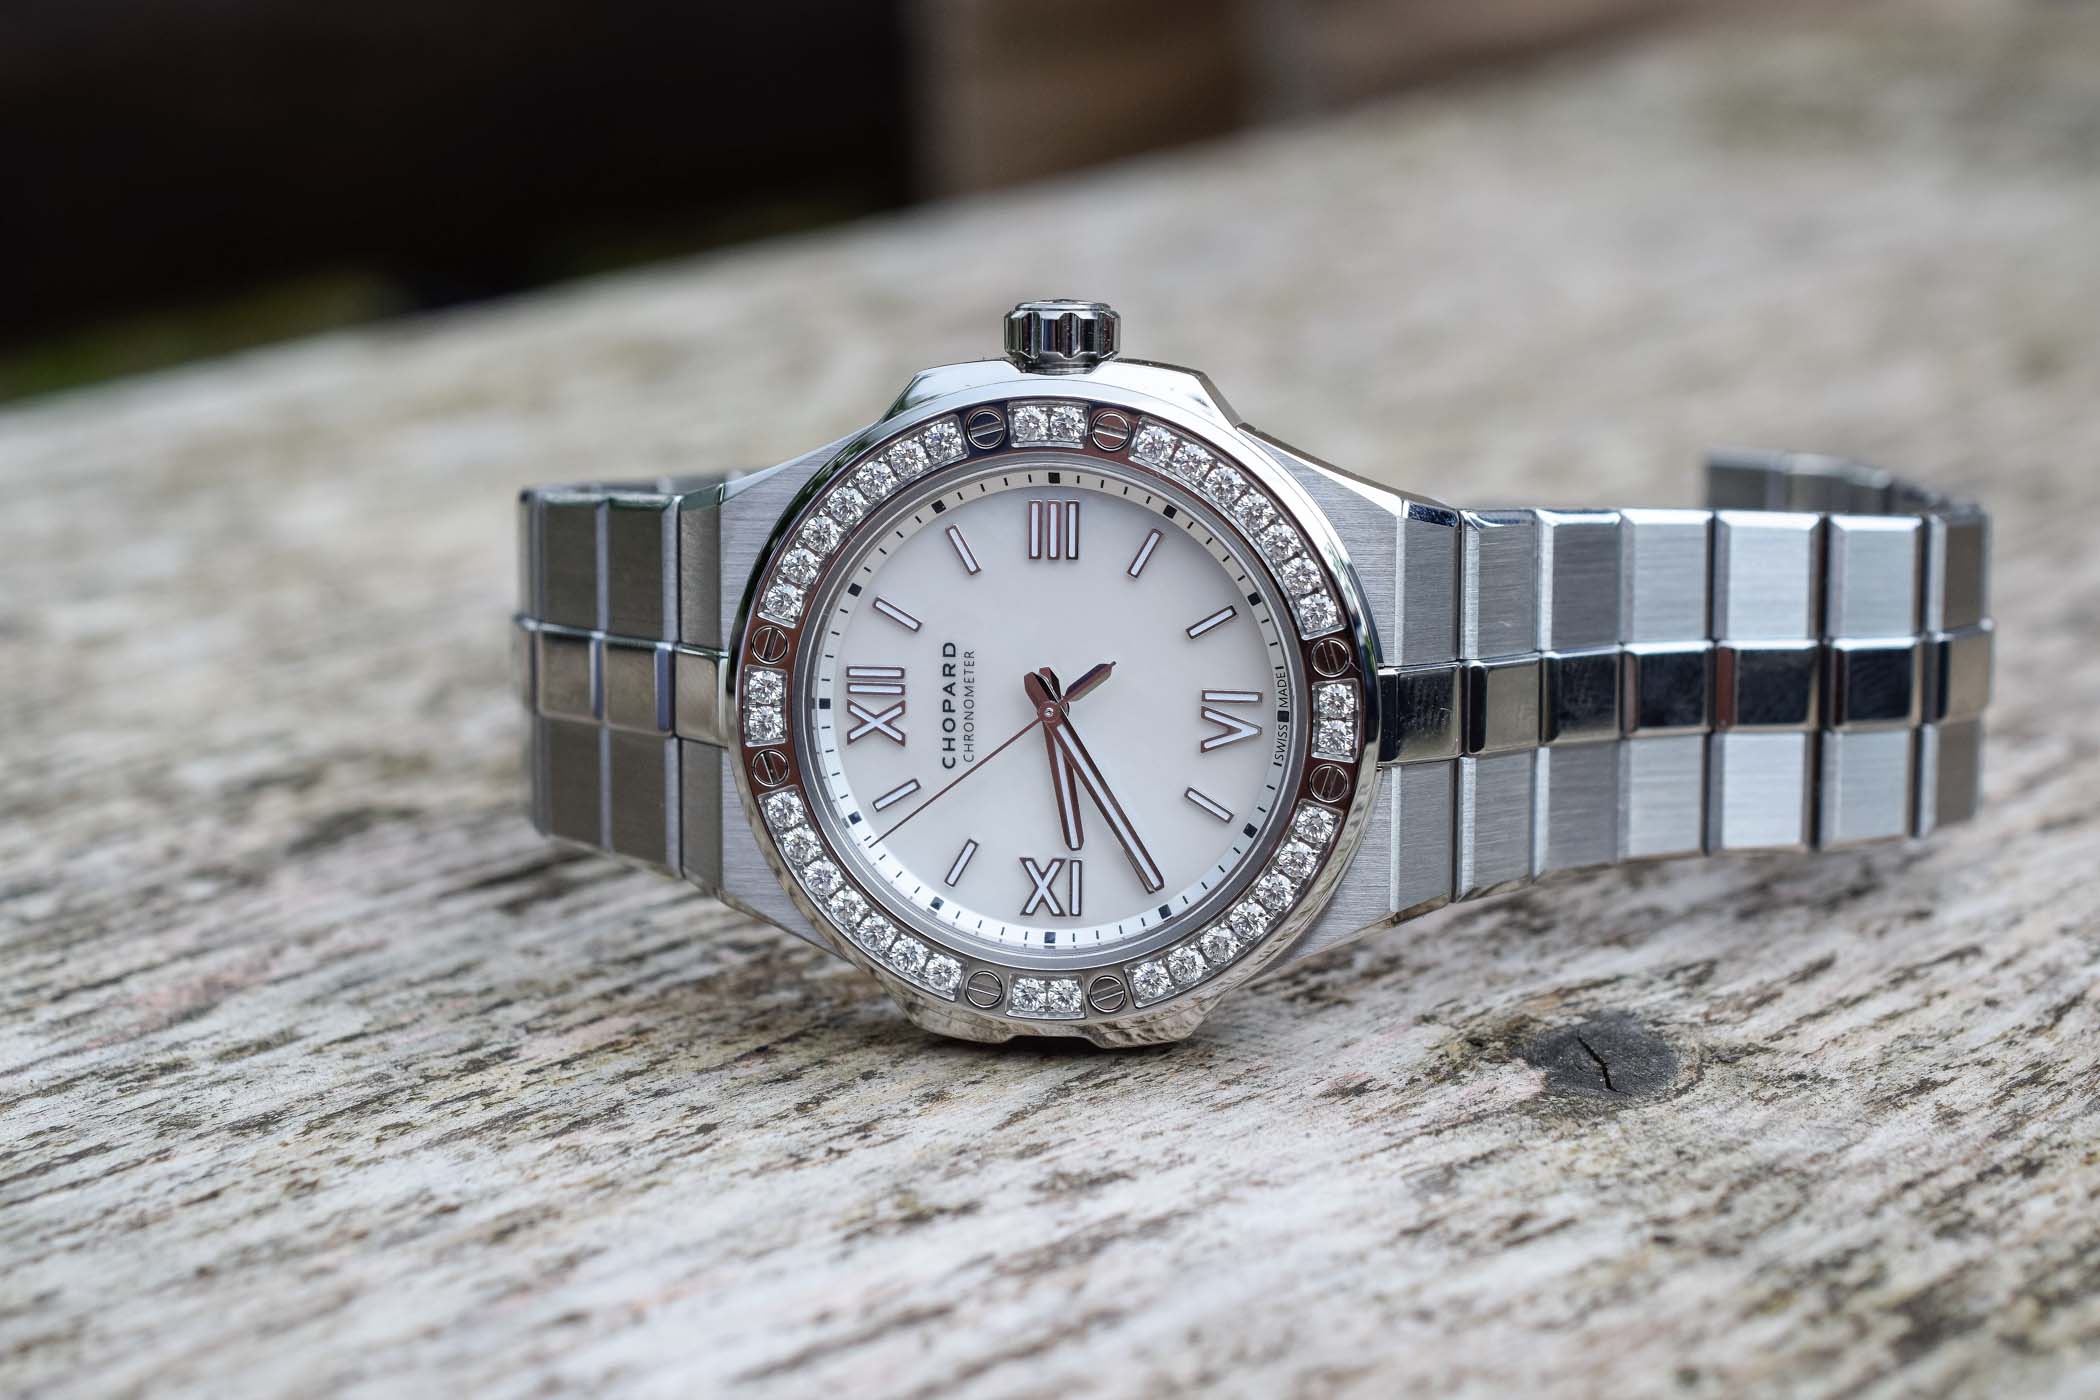 Chopard Alpine Eagle 36mm - Luxury Sports Watch Collection - Review - 2